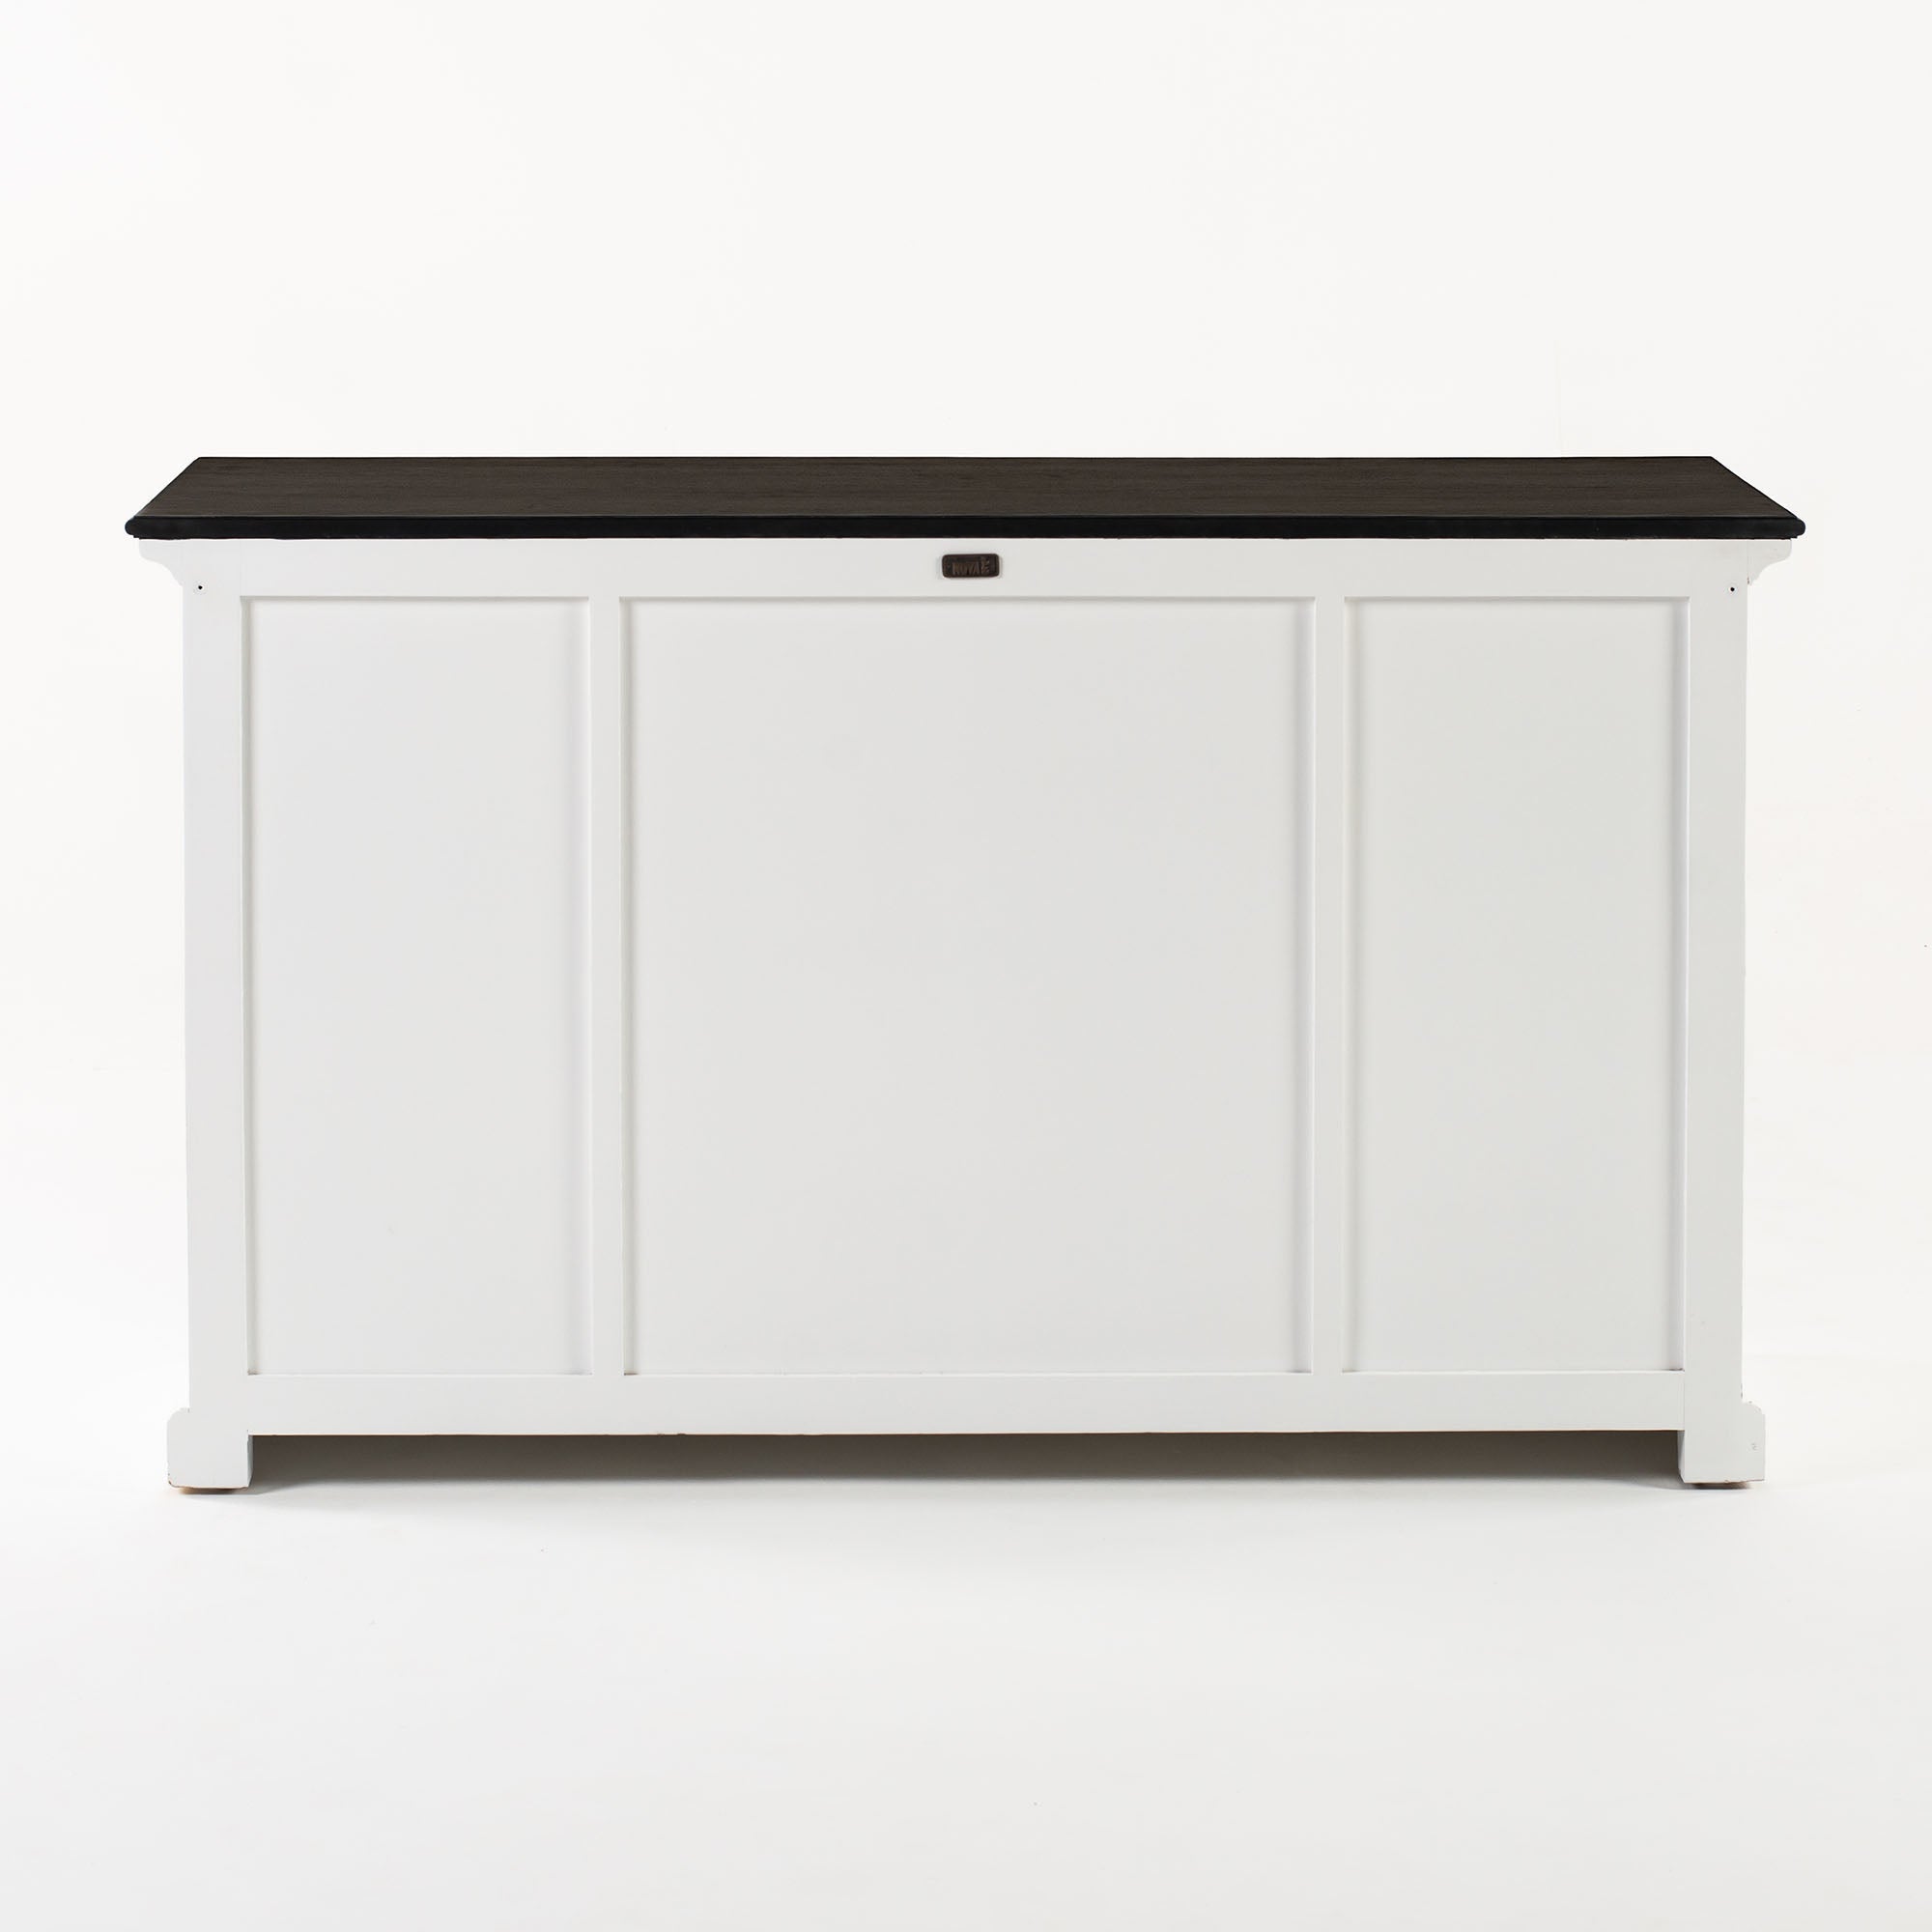 Halifax Contrast Farmhouse White & Black Buffet with 4 Doors 3 Drawers